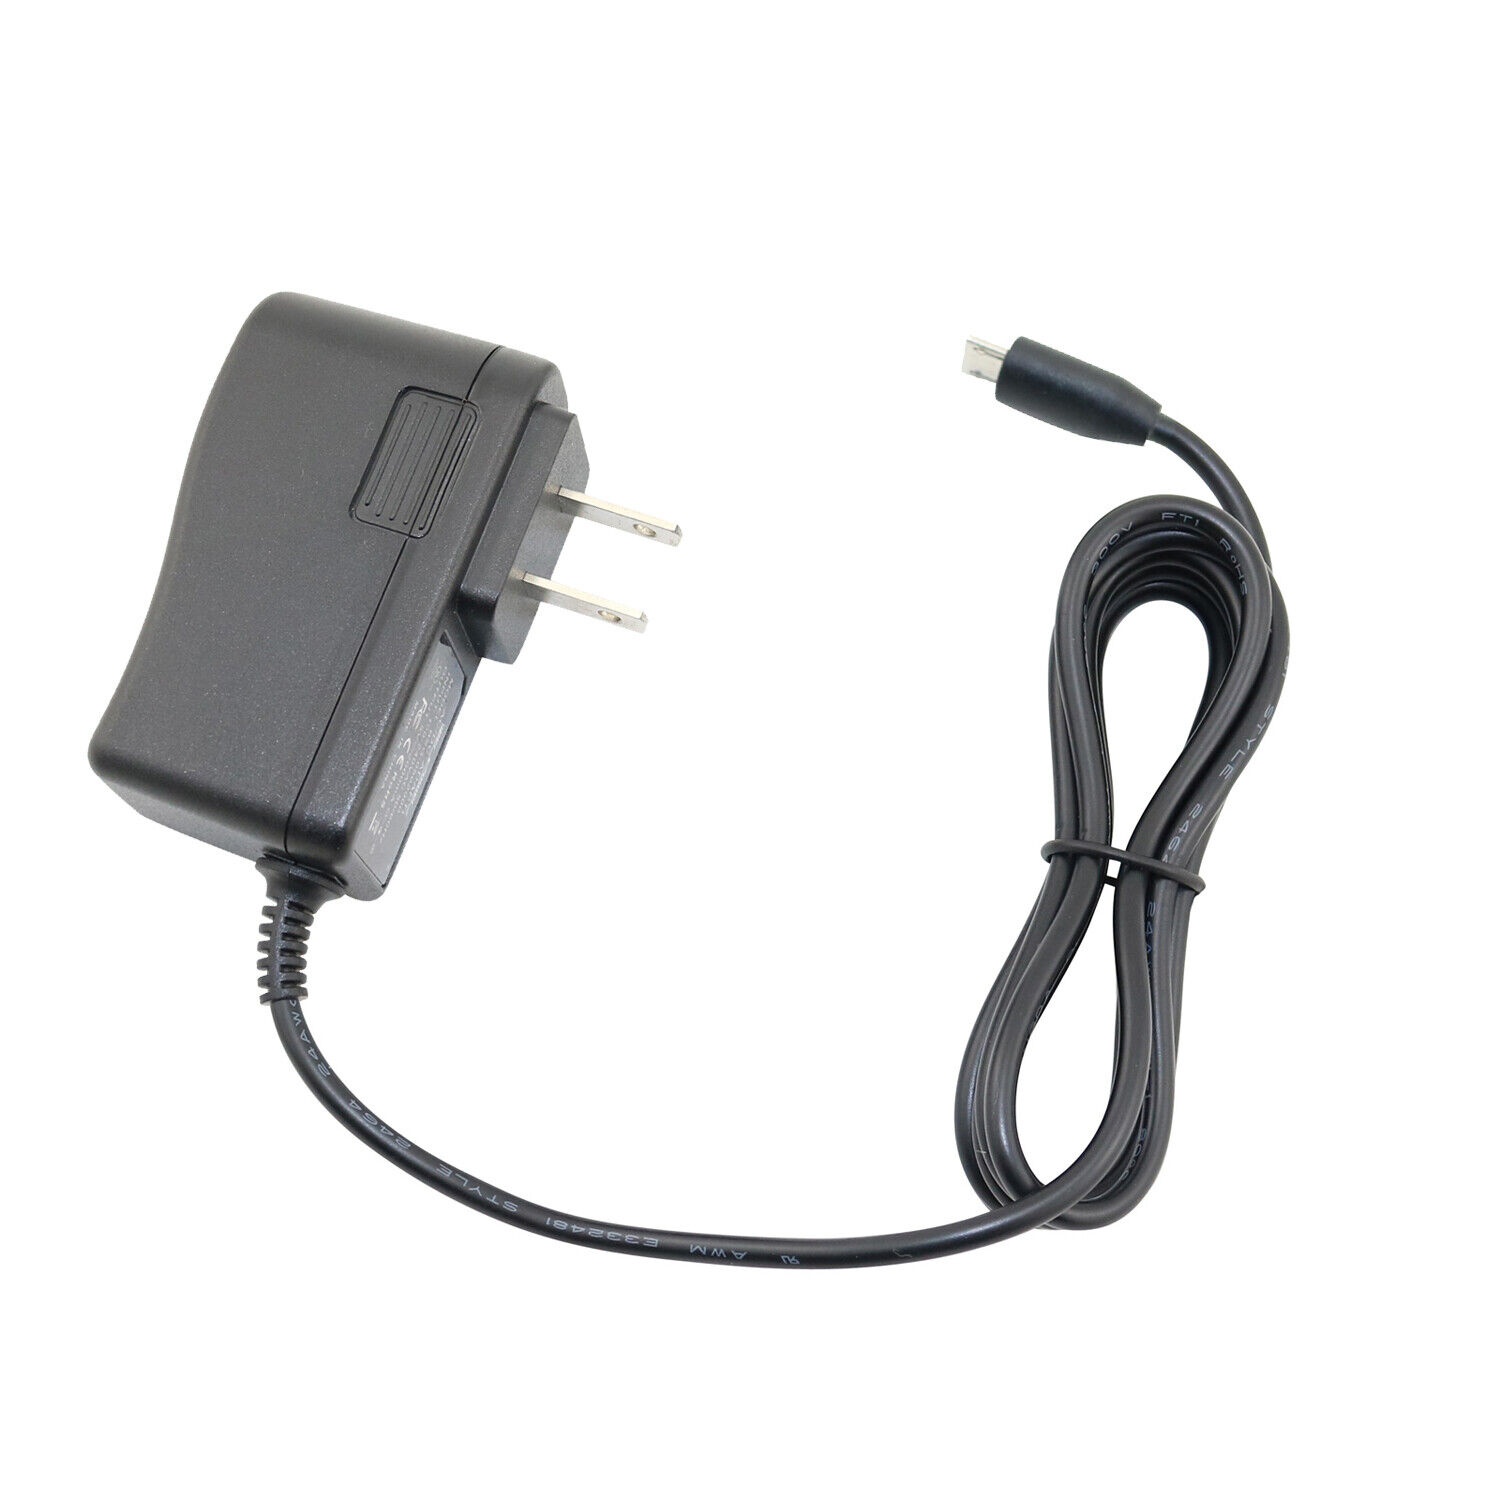 AC/DC Adapter Power Cord Charger for Google Home Mini Speaker AC/DC Adapter Power Cord Charger for Google Home Mini Spe